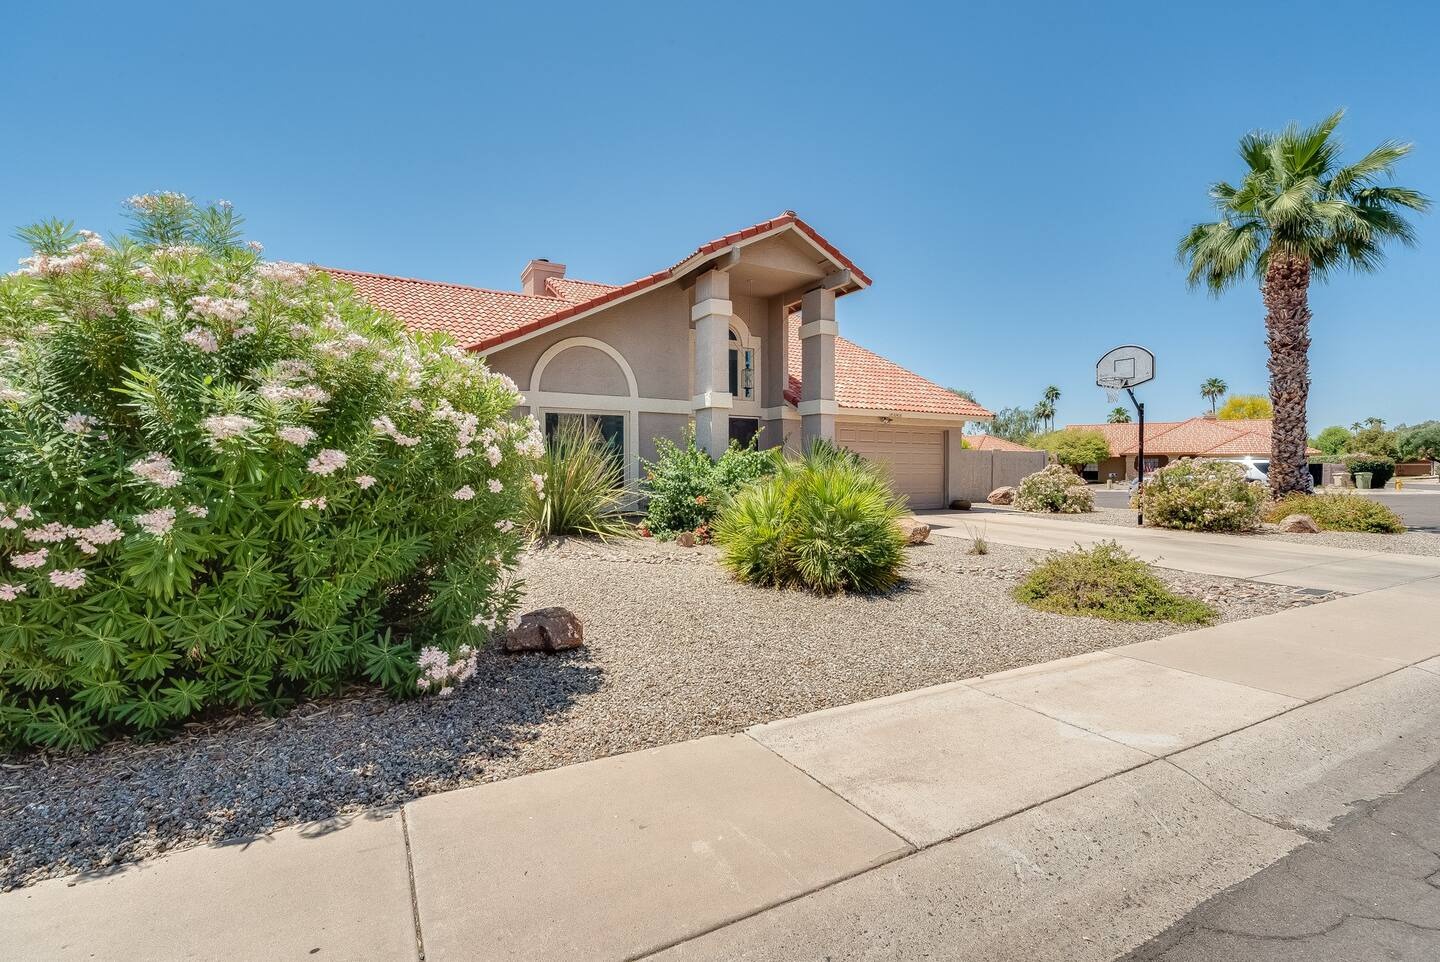 Glendale Vacation Rentals, Cahill Casa - Situated in the clean and manicured neighborhoods of the greater Phoenix area, this property is just minutes away from several stores and restaurants, entertainment venues and golf courses!